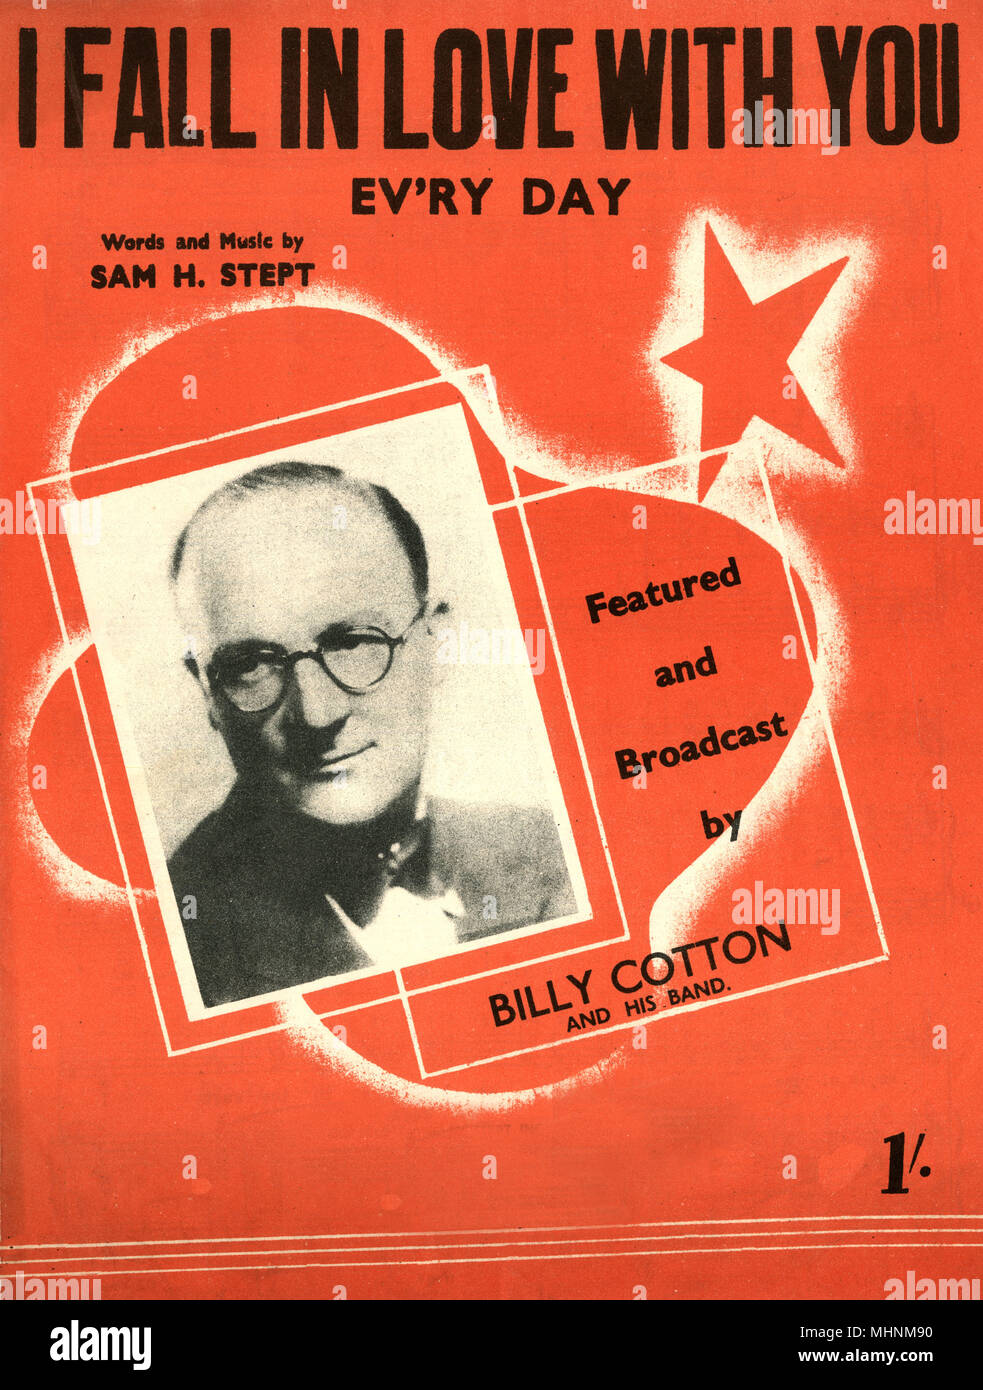 'I fall in love with you ev'ry day' - Music Sheet Cover, words and music by Sam H. Stept, featured and broadcast by Billy Cotton and his band. An illustration with stars and a photo of Billy Cotton in the middle.     Date: circa 1932 Stock Photo